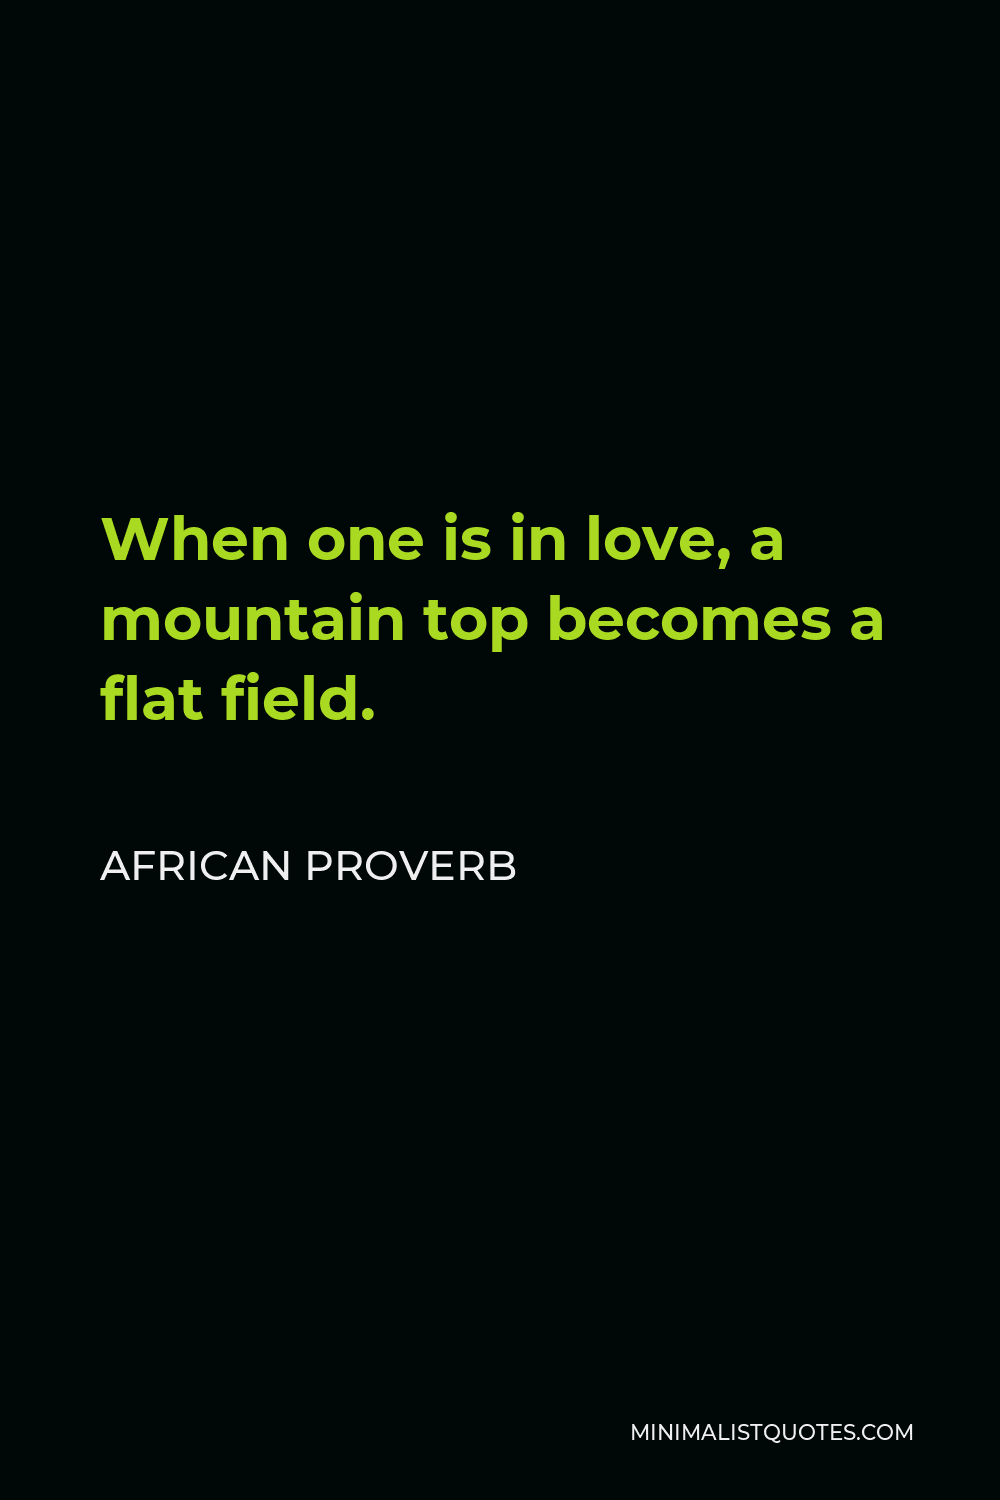 African Proverb Quote - When one is in love, a mountain top becomes a flat field.